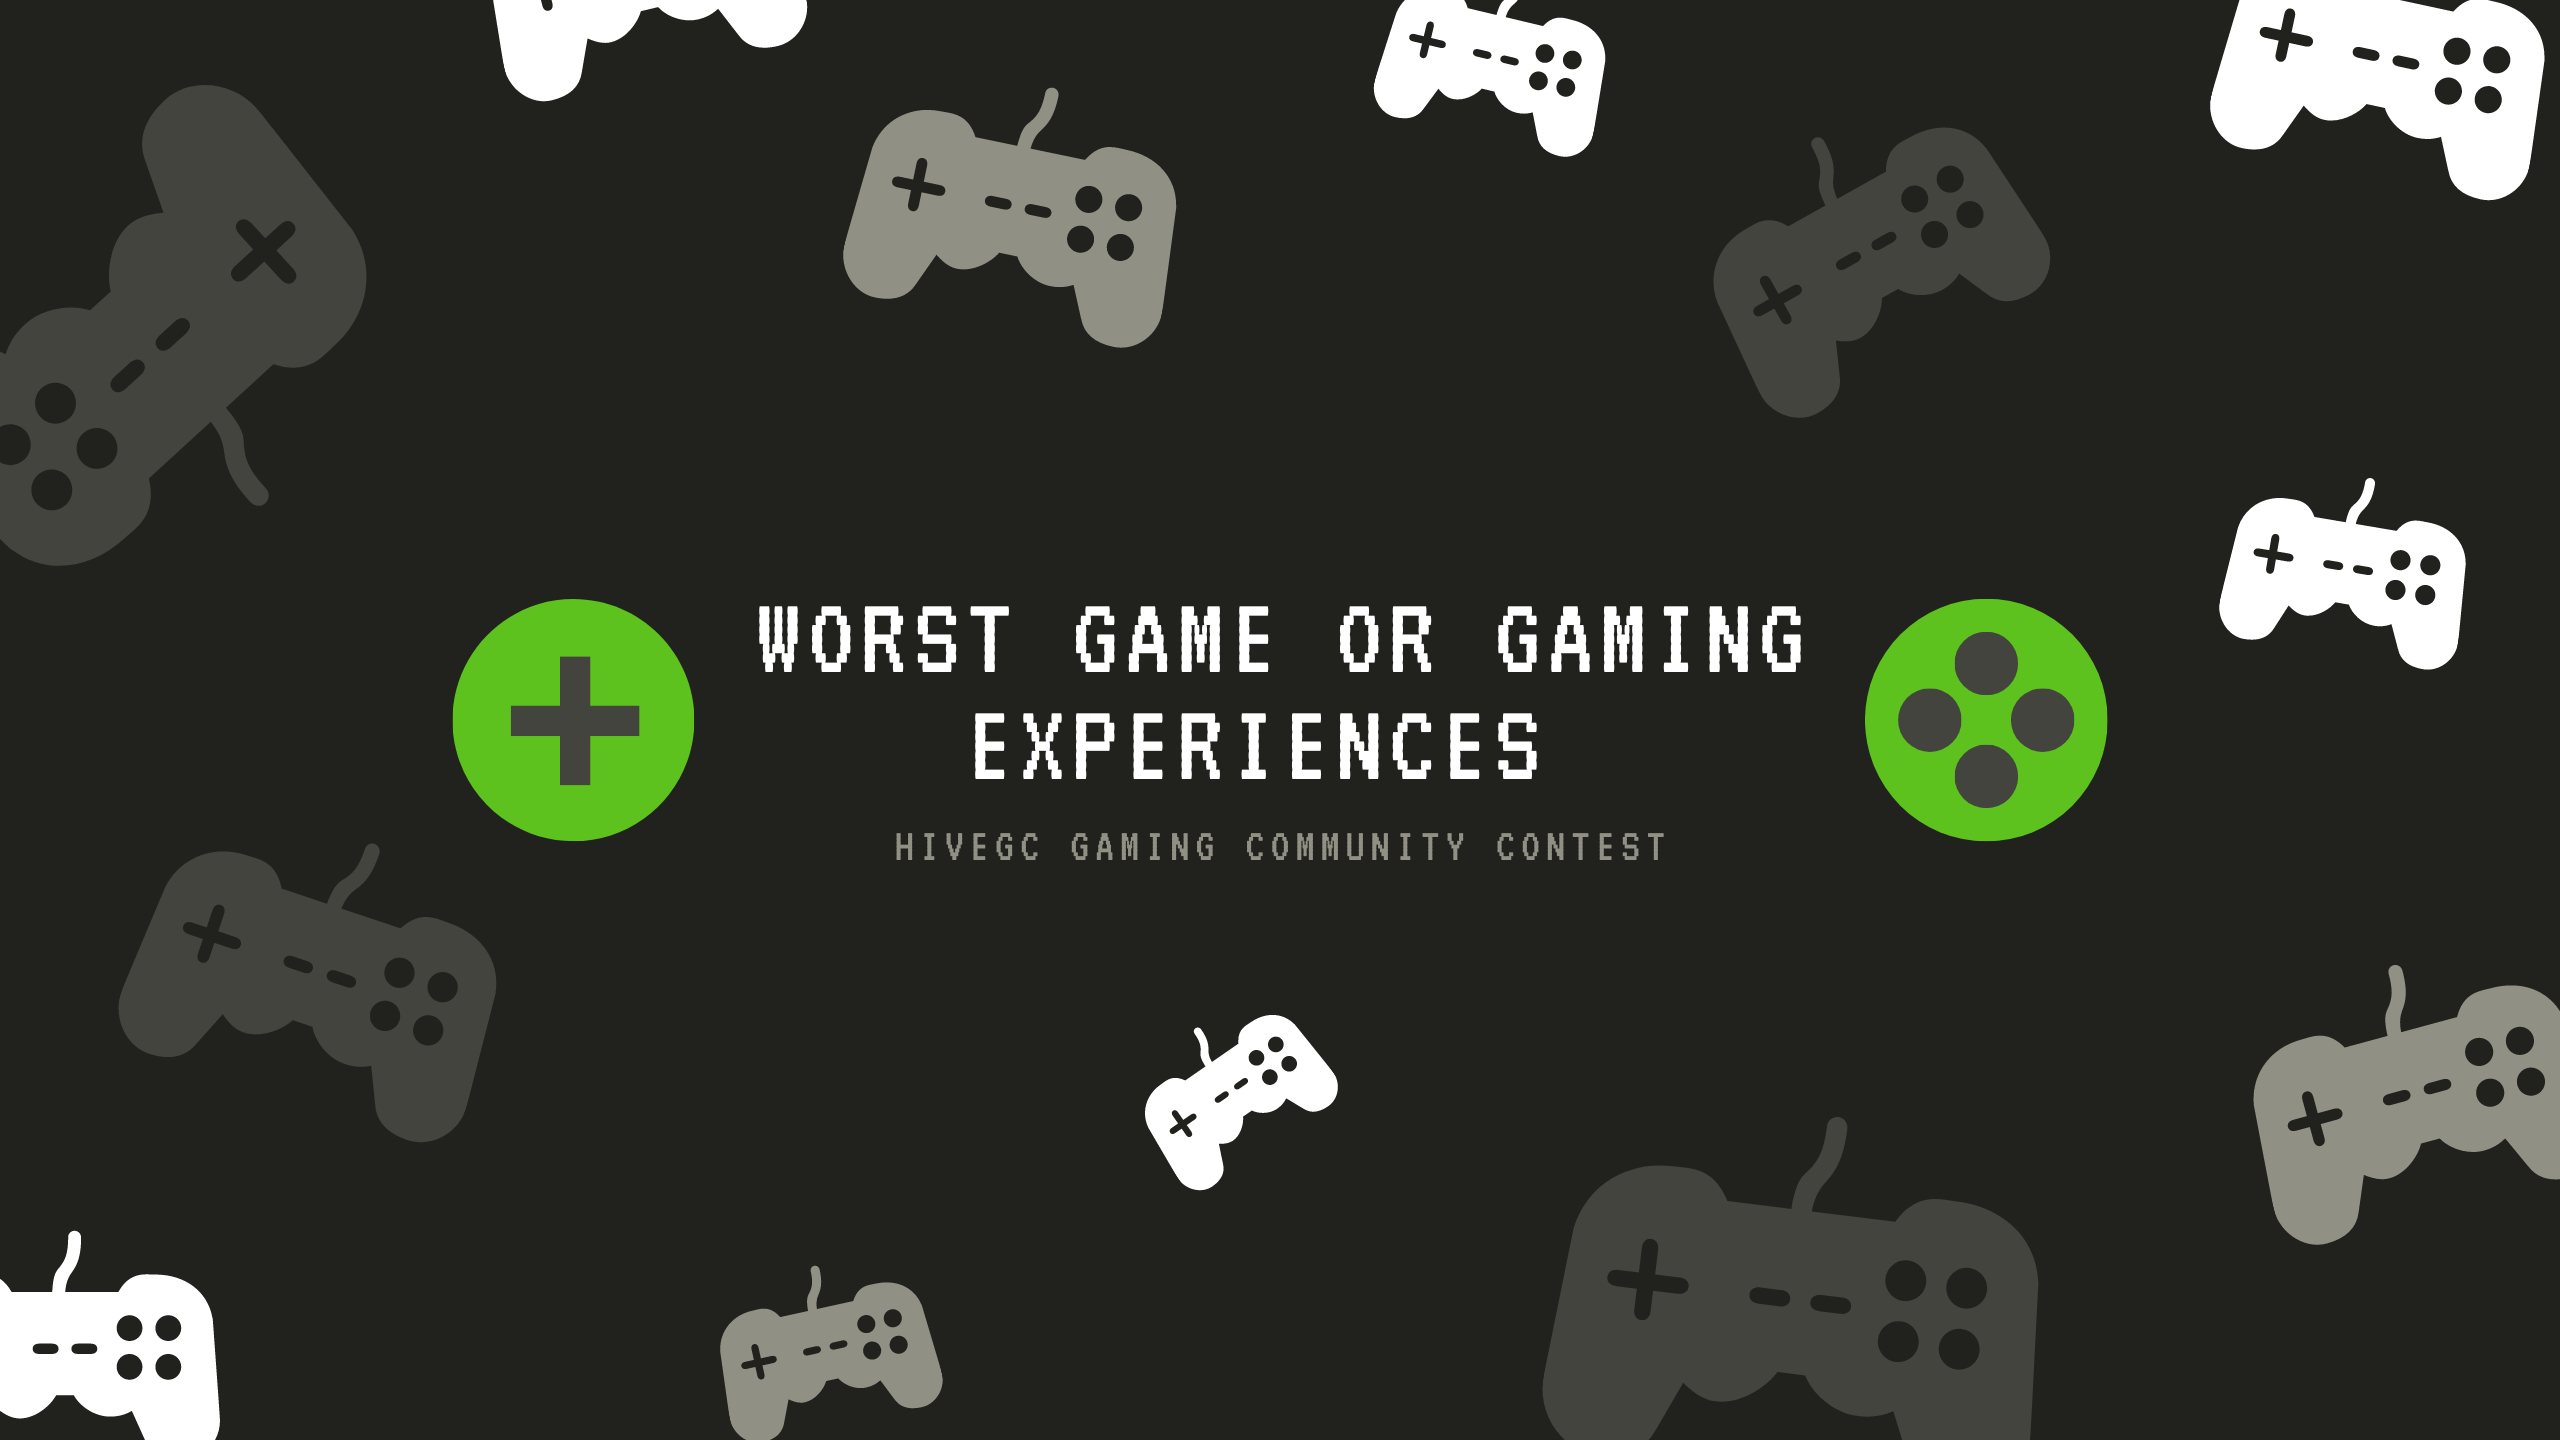 gaming zone — like / reblog if you save. DON'T repost. follow